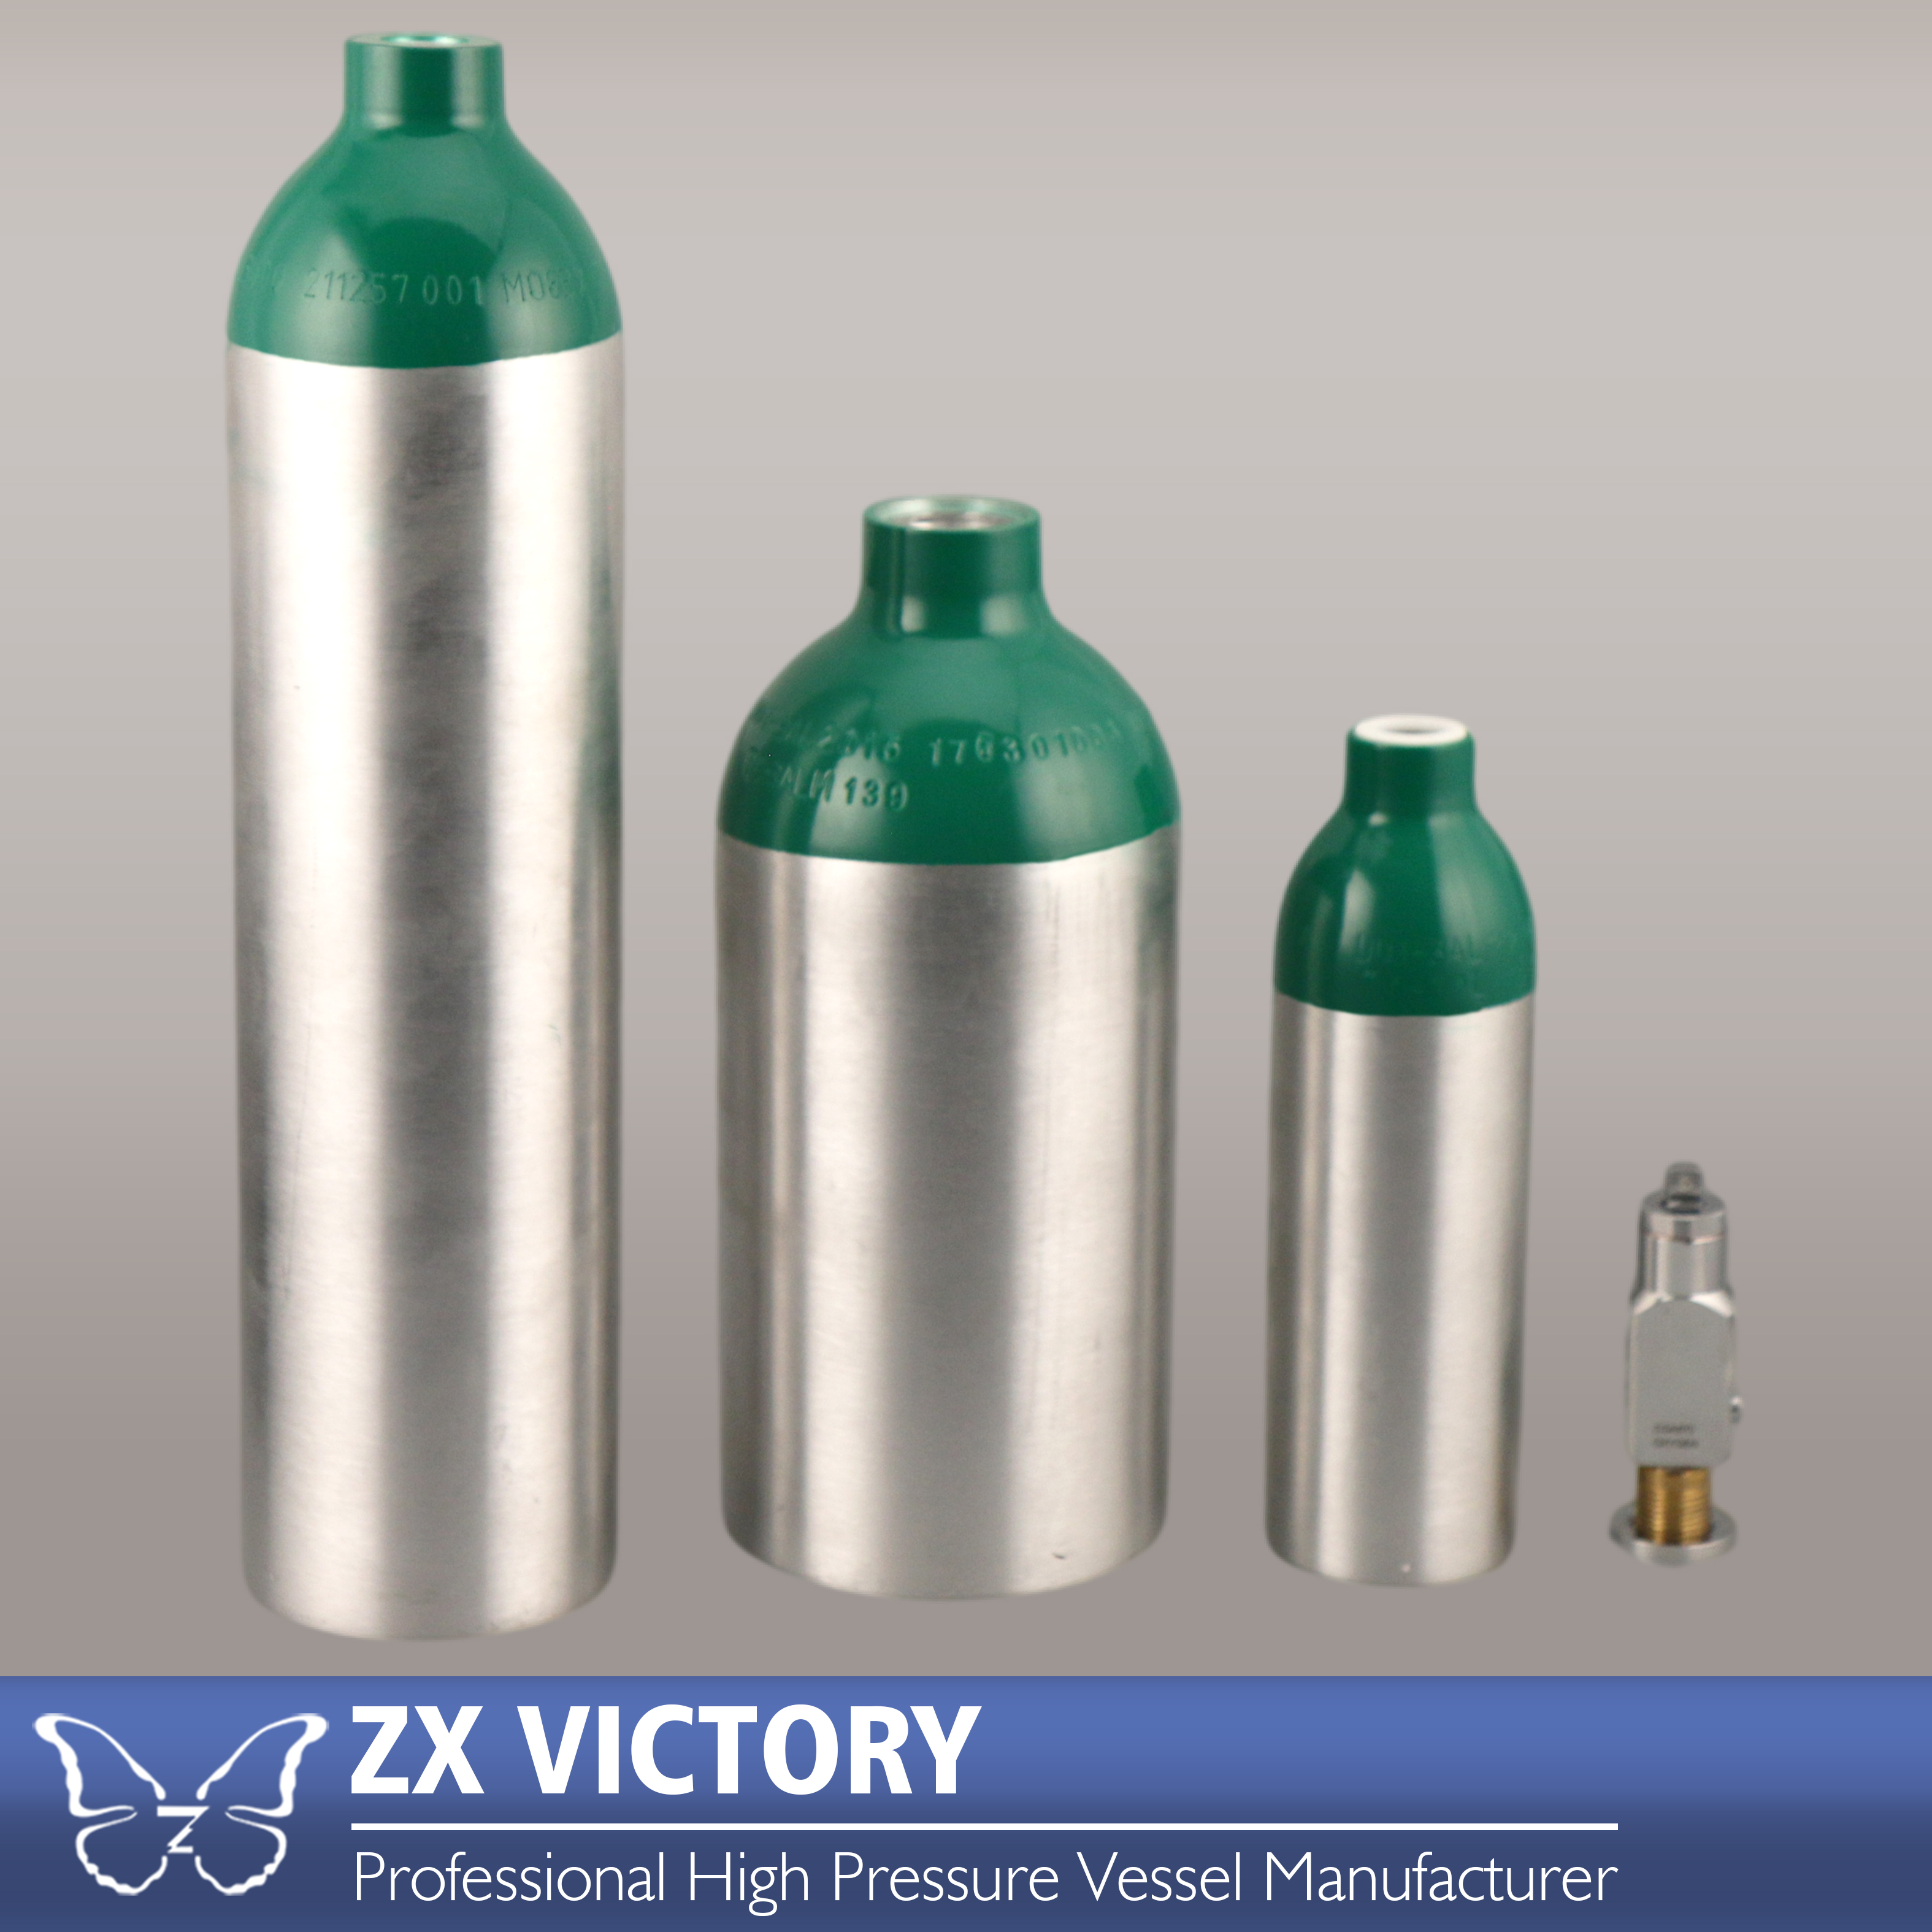 Why are aluminum oxygen cylinders becoming increasingly popular?